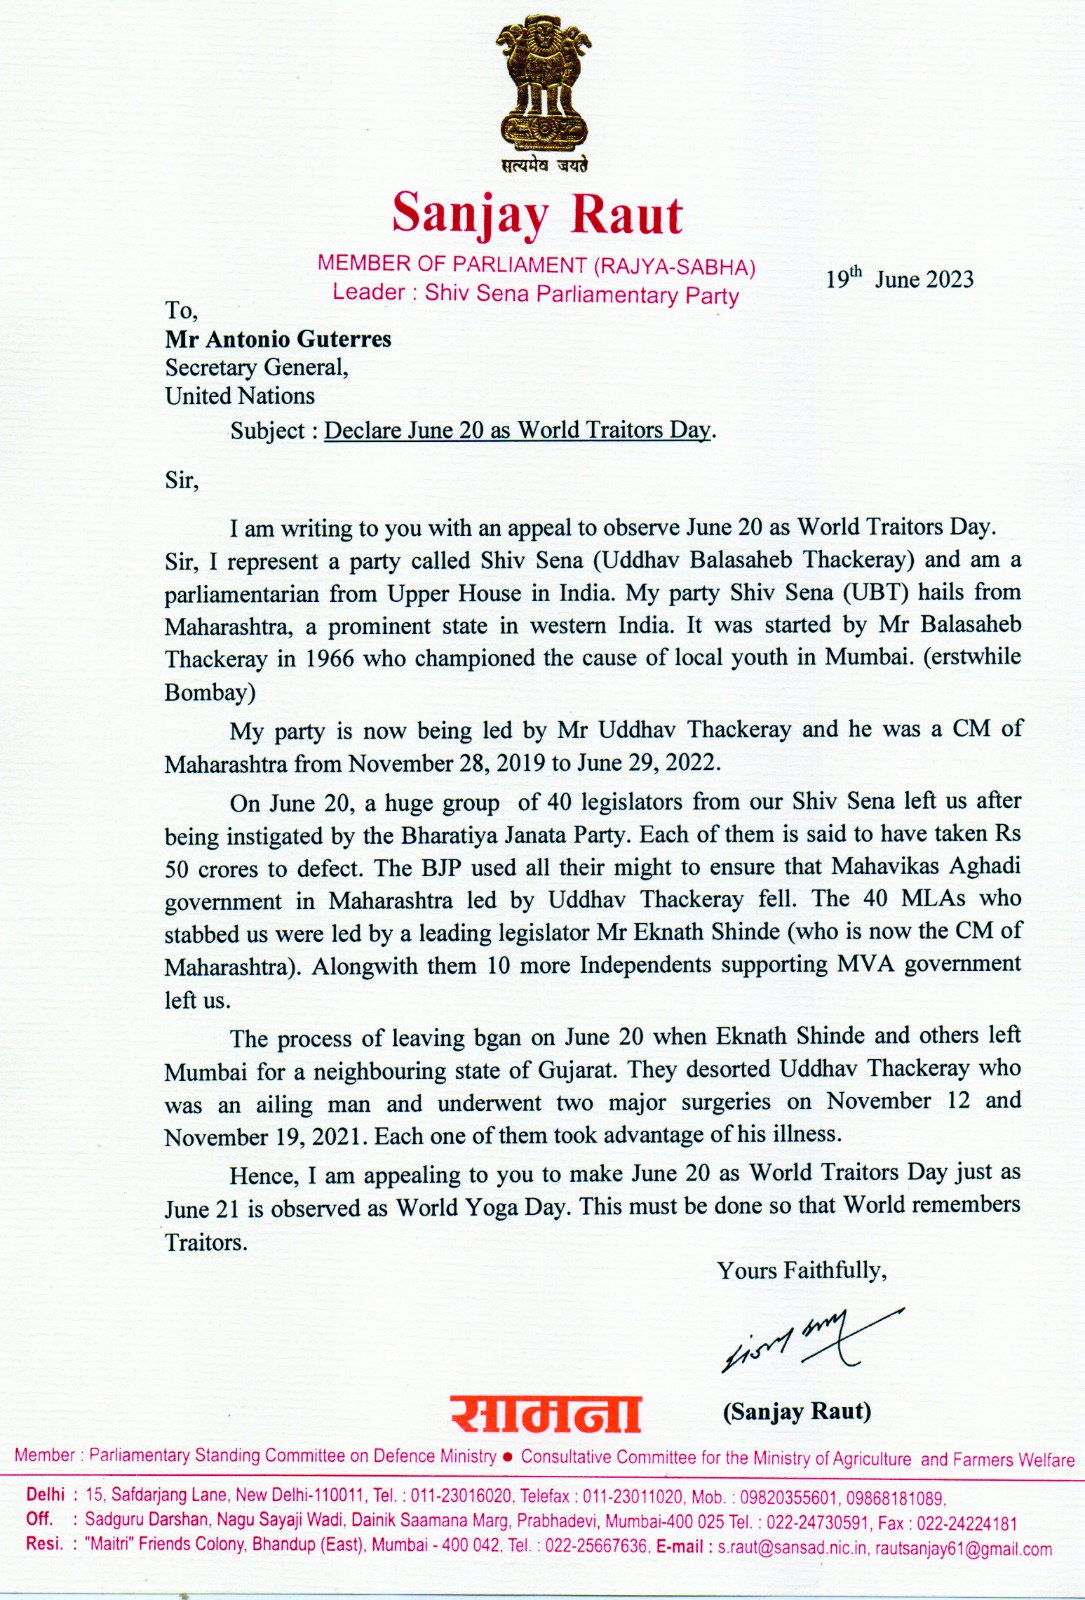 Sanjay Raut letter to united nations